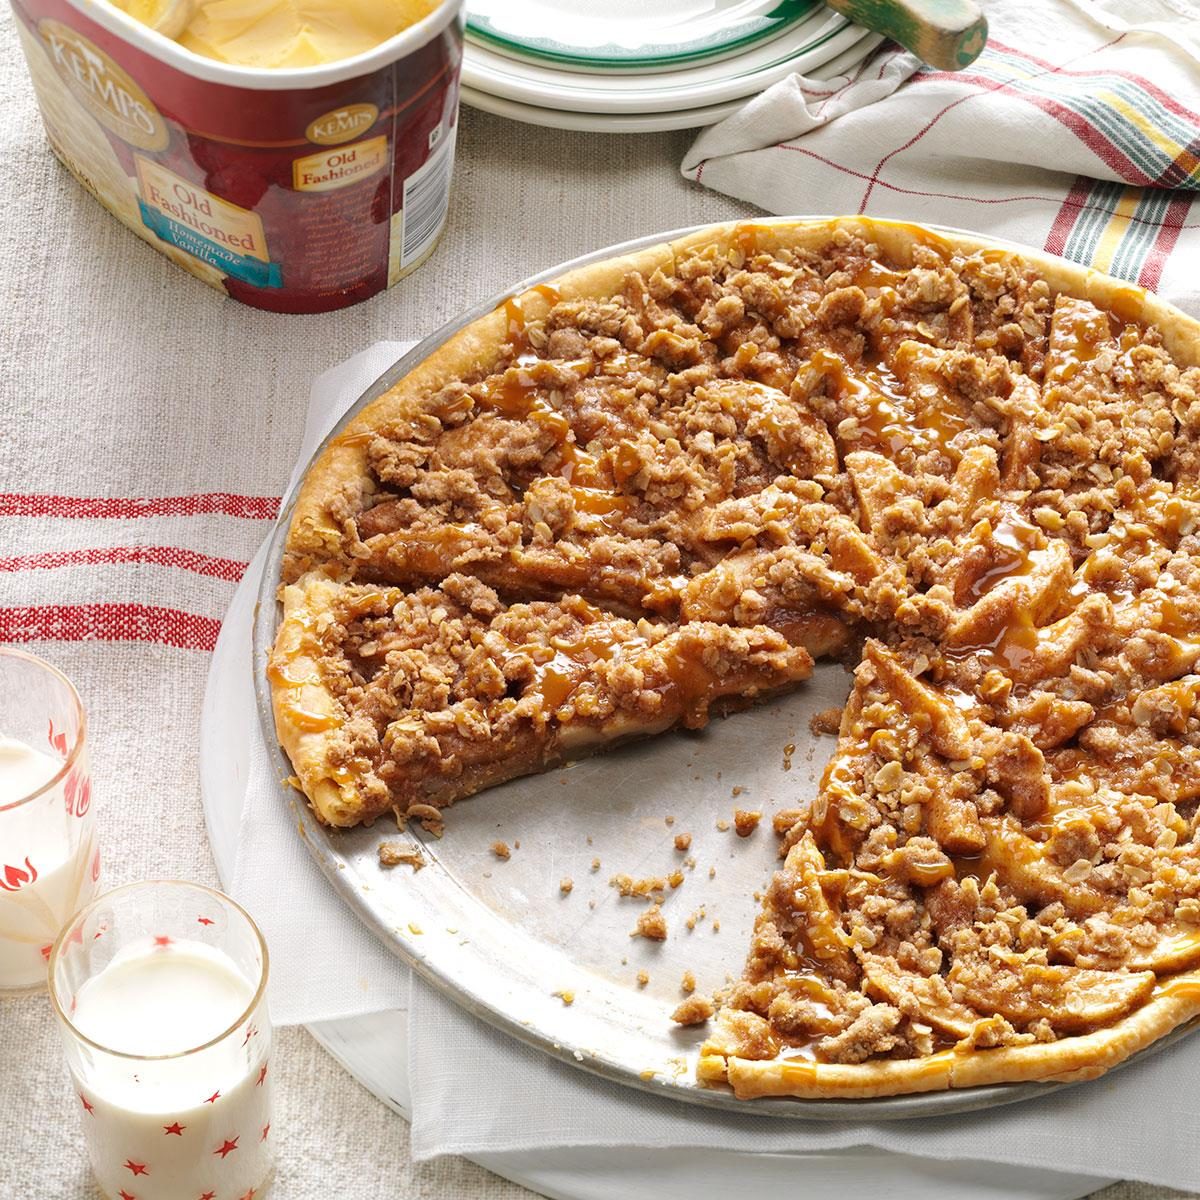 <p>While visiting a Wisconsin orchard, I tried a tempting apple crisp pie. At home, I put together this apple pizza. As it bakes, the enticing aroma fills my kitchen, and friends and family linger waiting for a sample. —Nancy Preussner, Delhi, Iowa</p> <div class="listicle-page__buttons"> <div class="listicle-page__cta-button"><a href='https://www.tasteofhome.com/recipes/apple-crisp-pizza/'>Go to Recipe</a></div> </div>